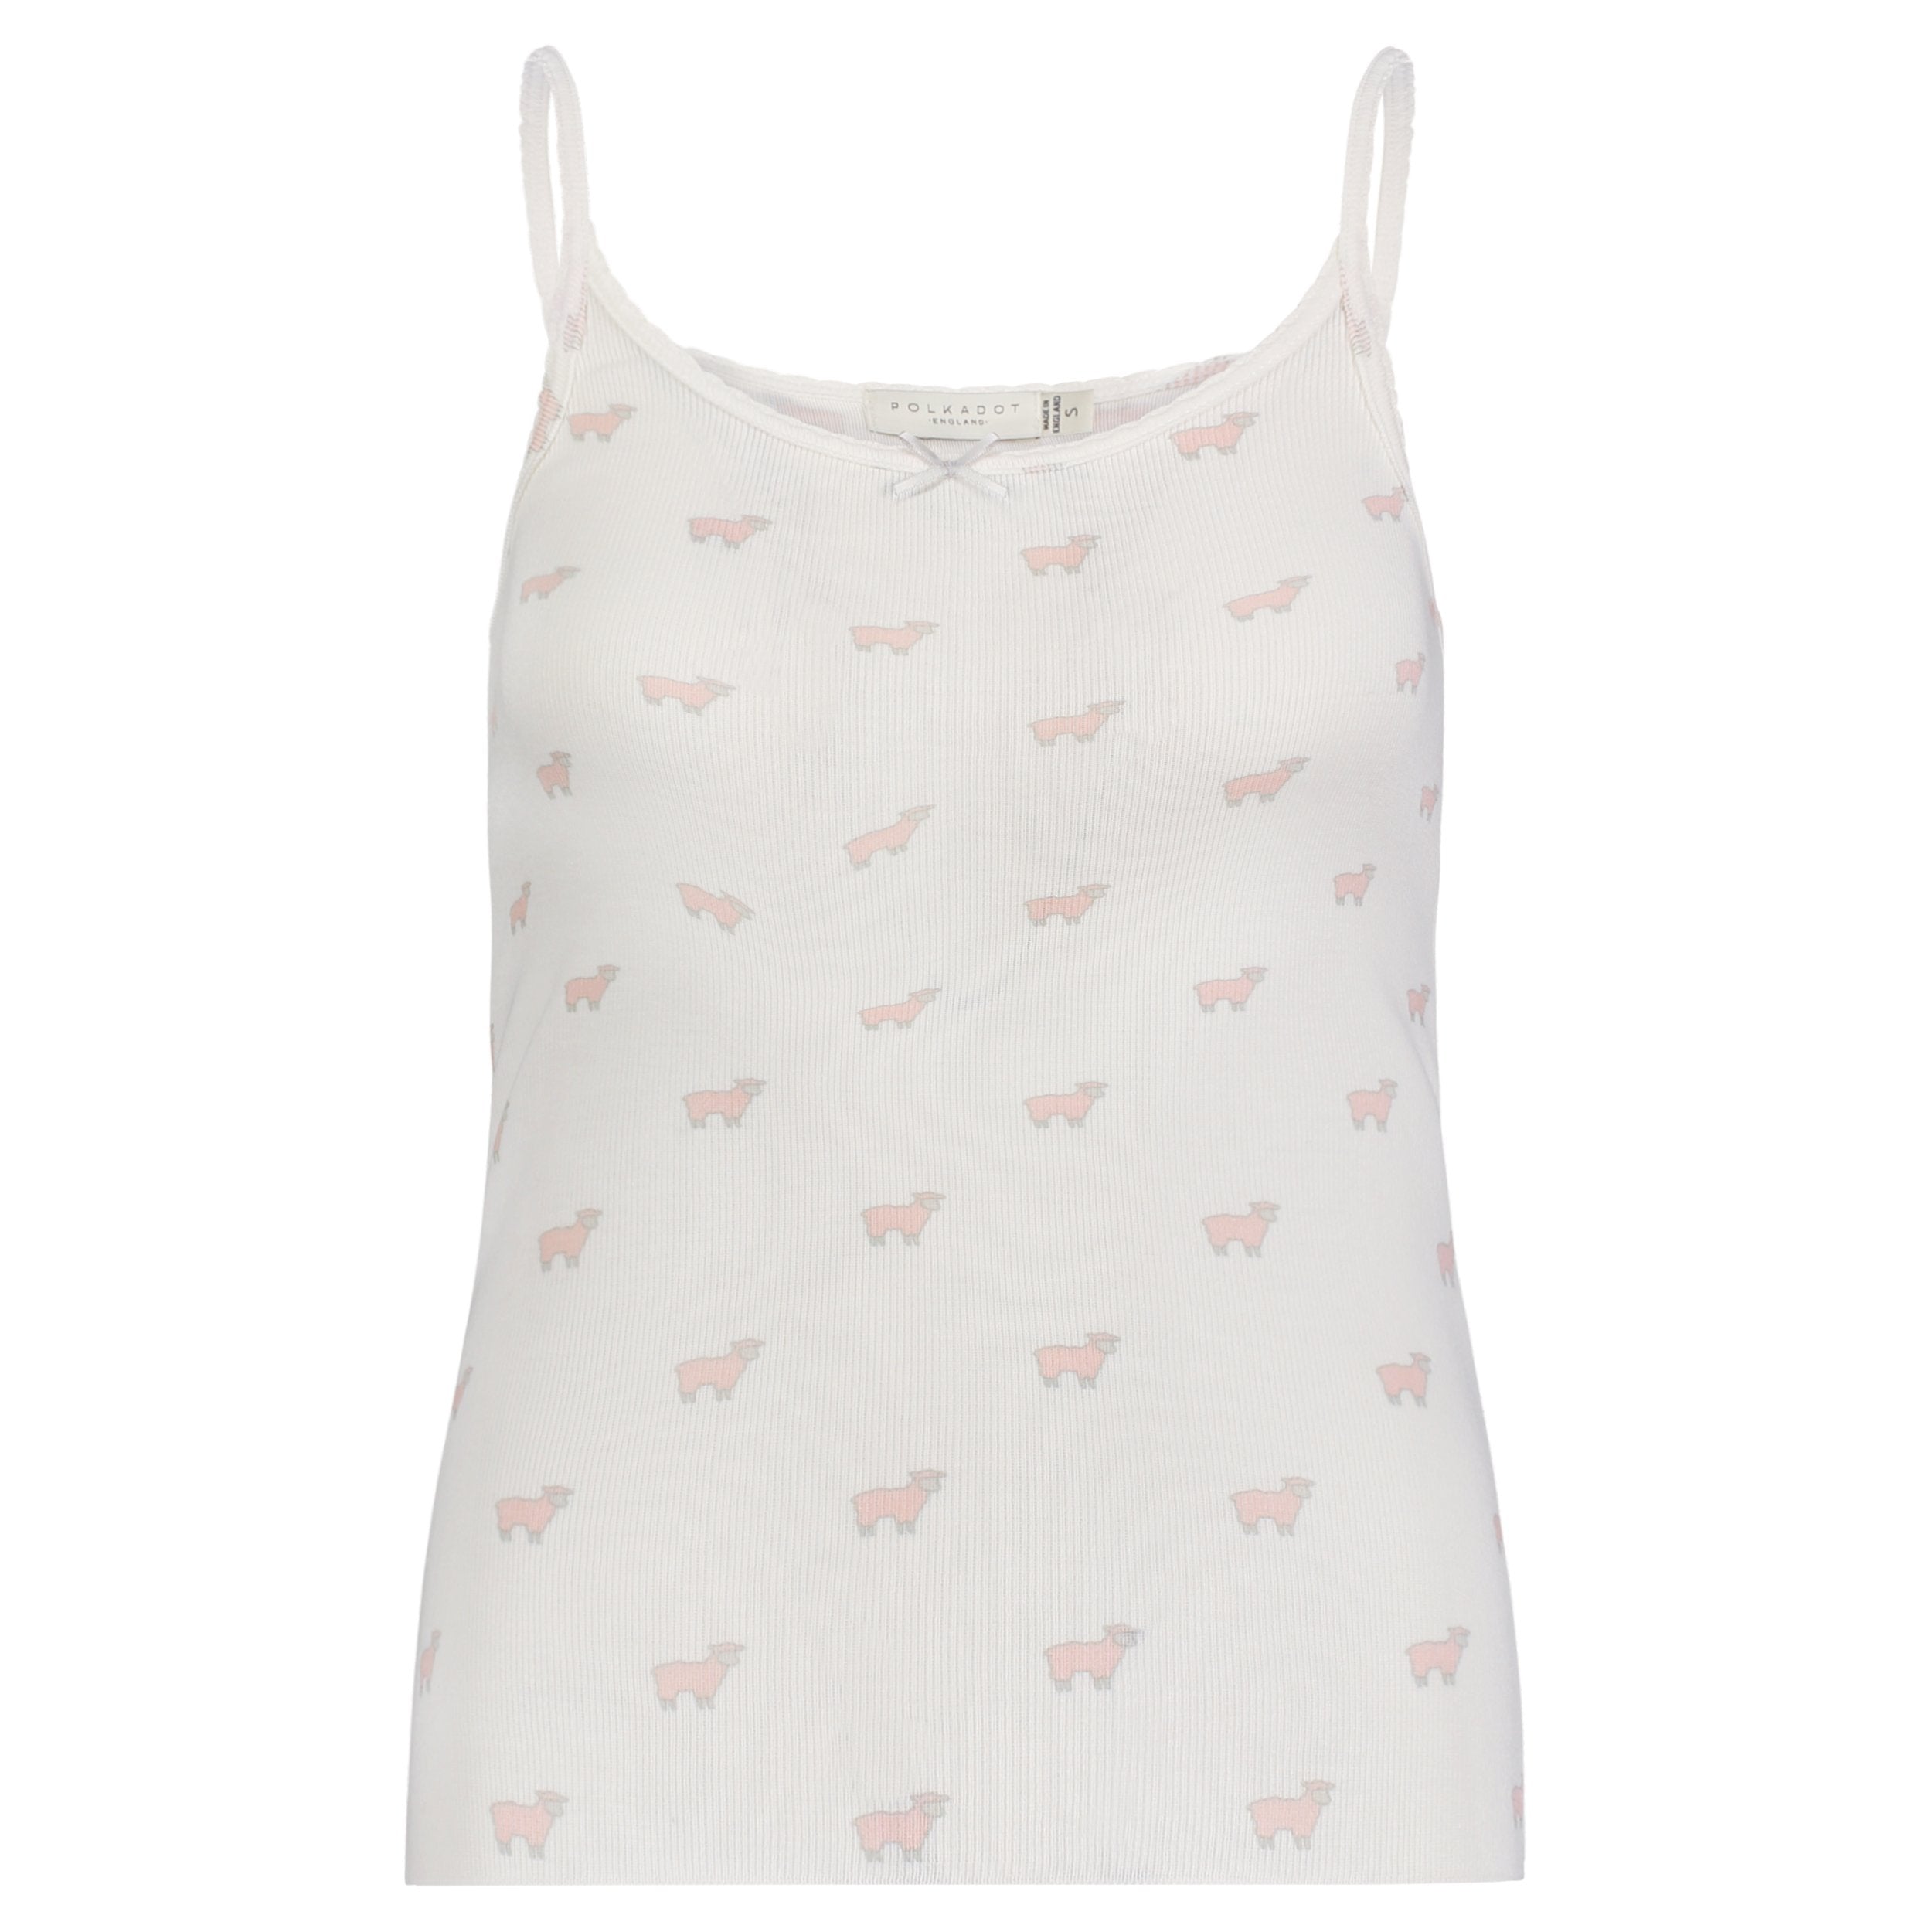 PINK SHEEP Print SCOOP CAMISOLE